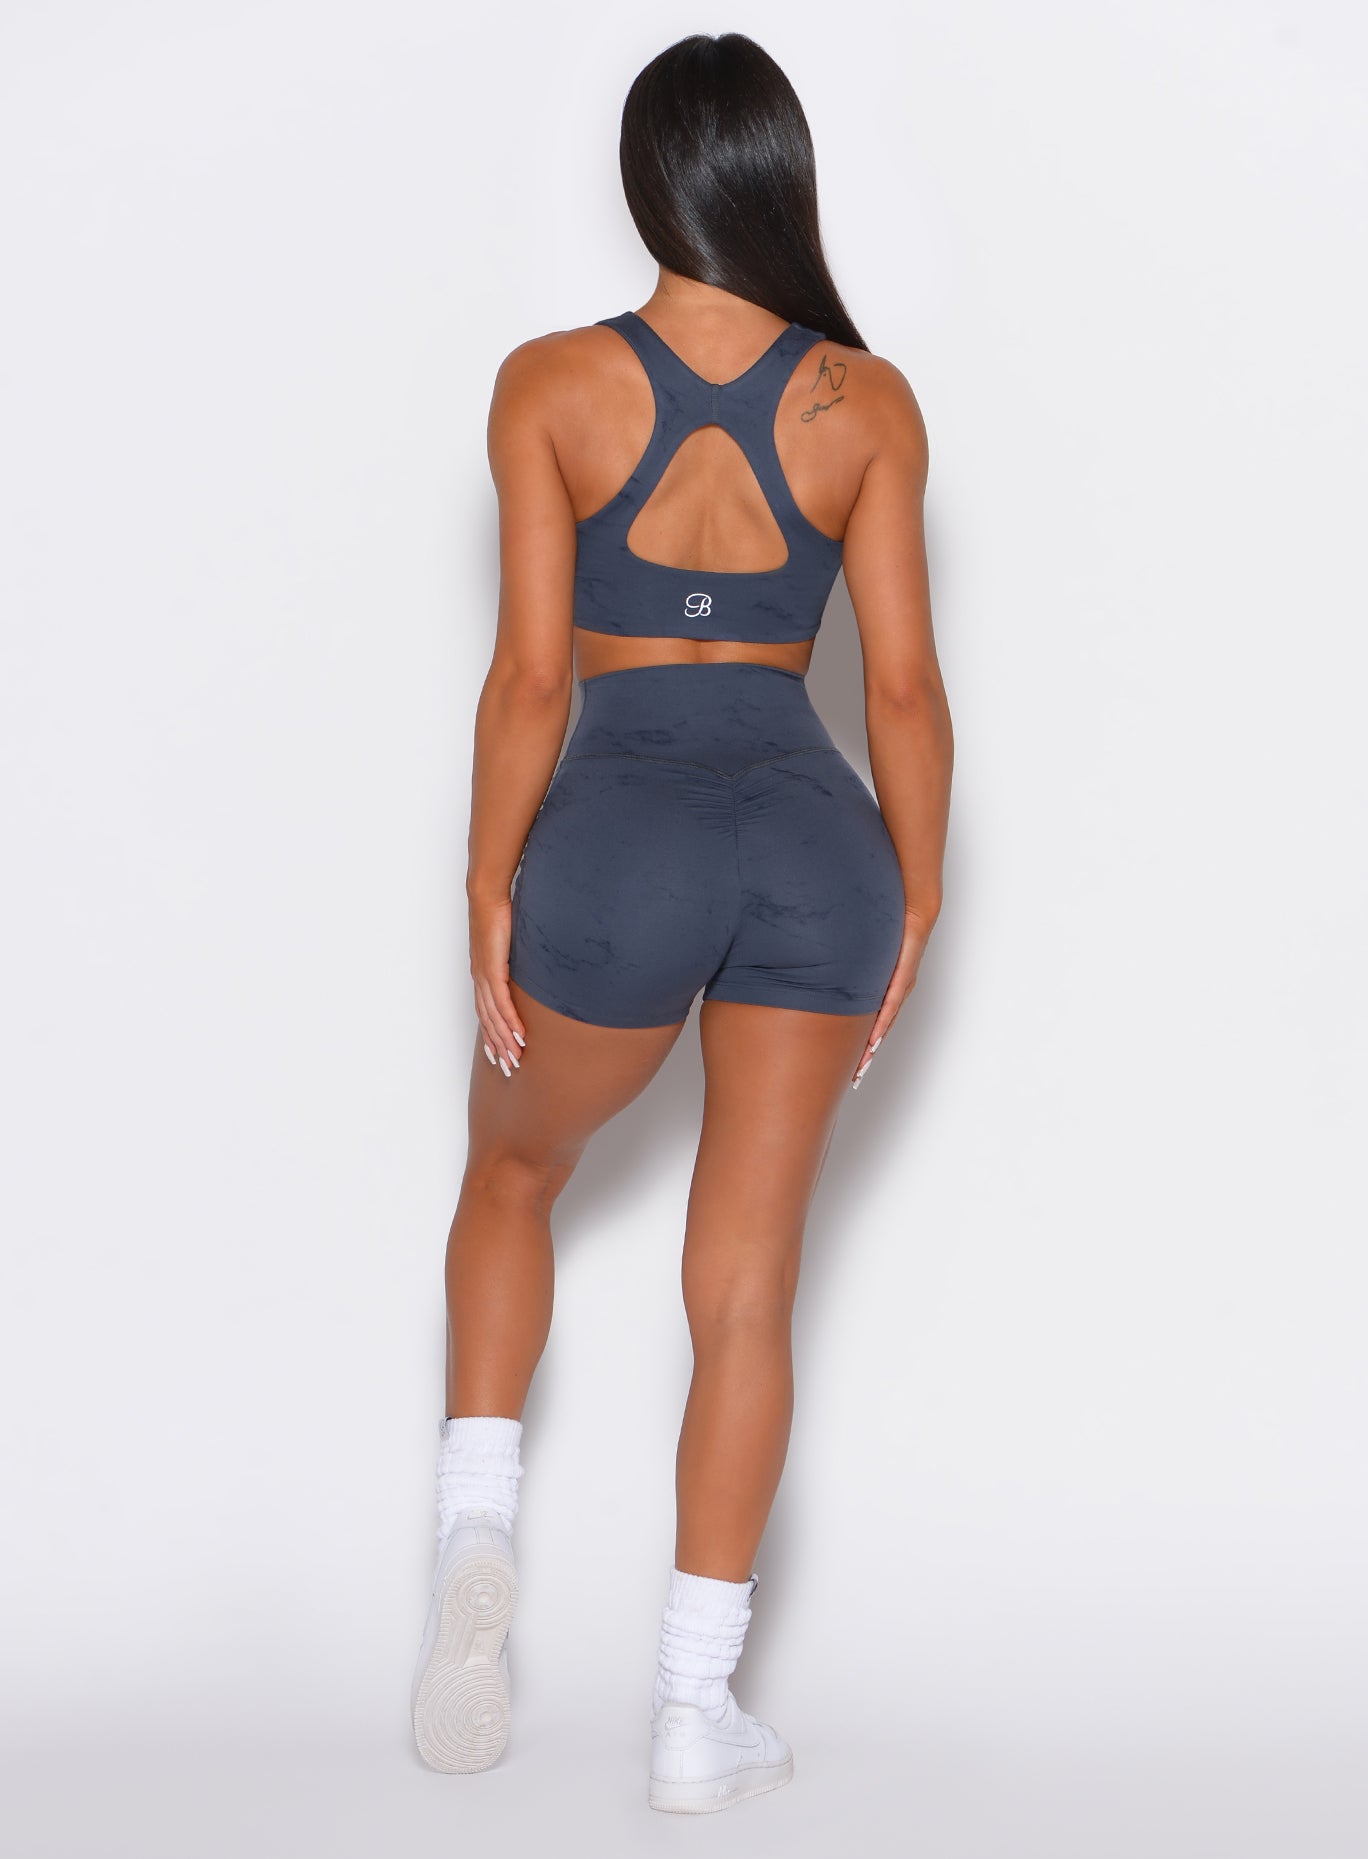 back profile picture of a model wearing our fit marble shorts in thunder gray color along with the matching bra